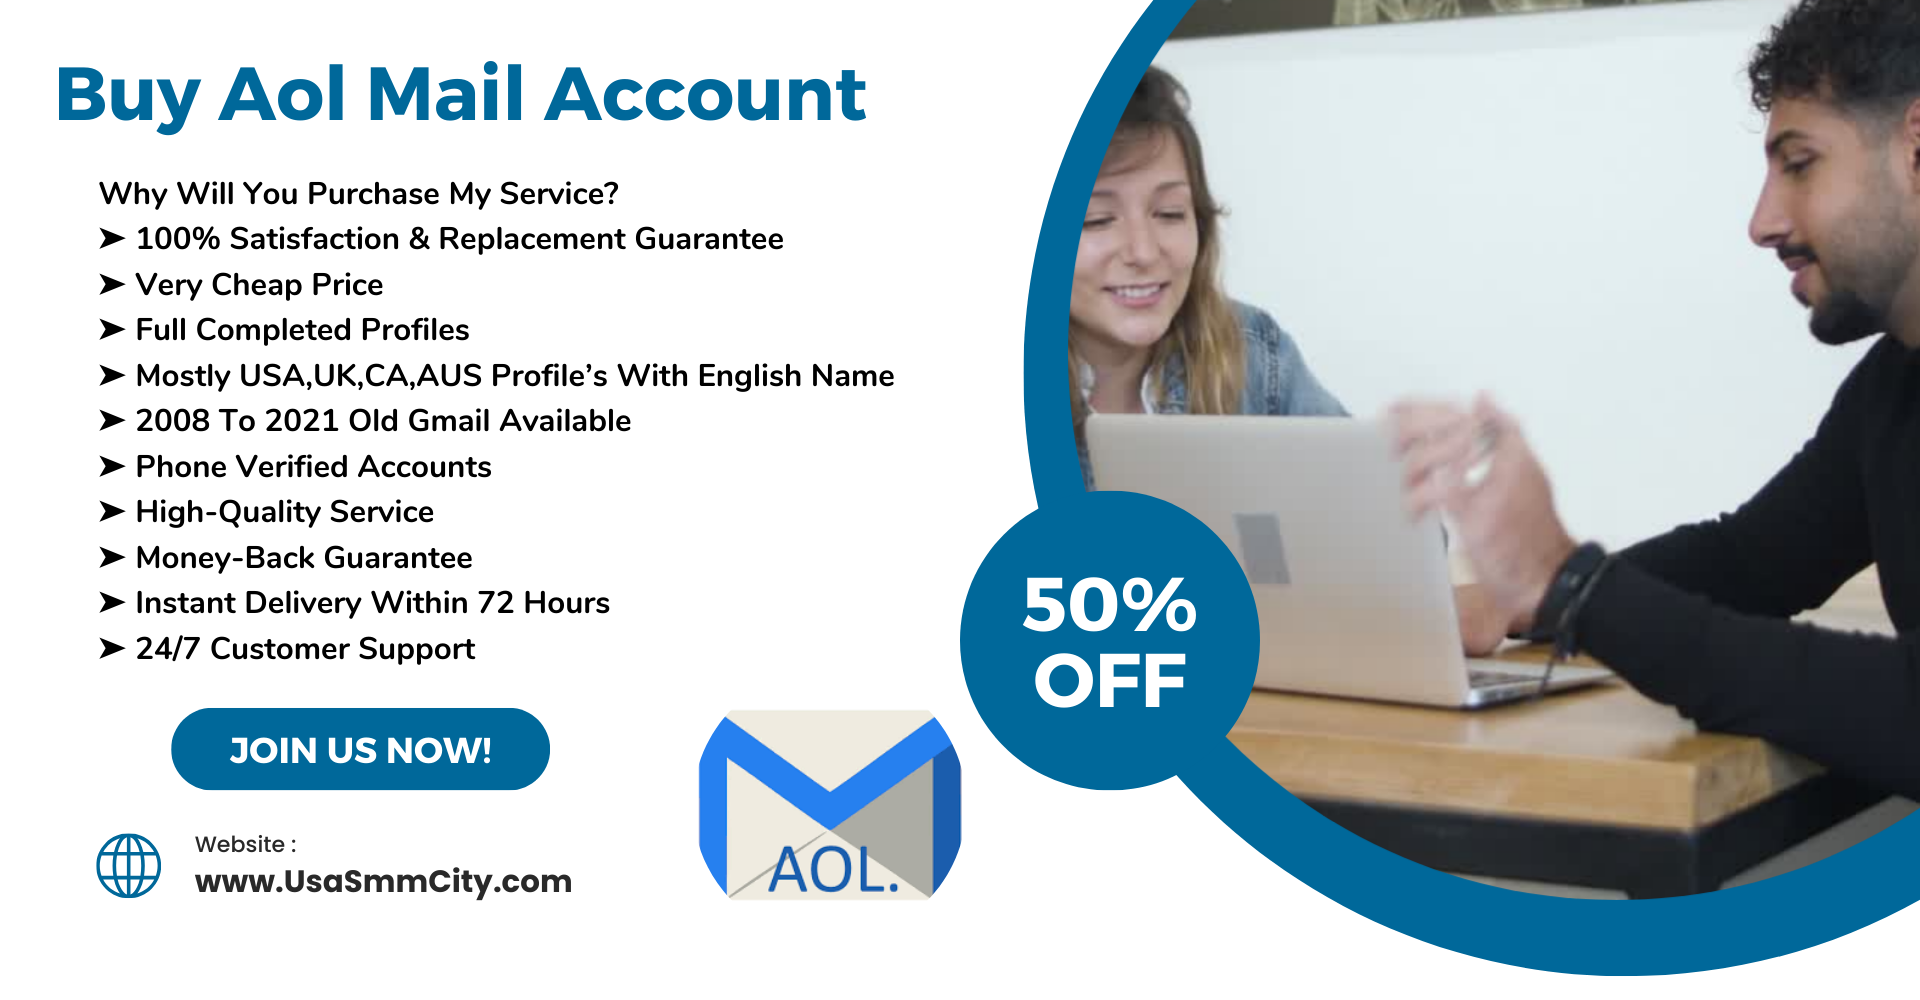 Buy Aol Mail Account